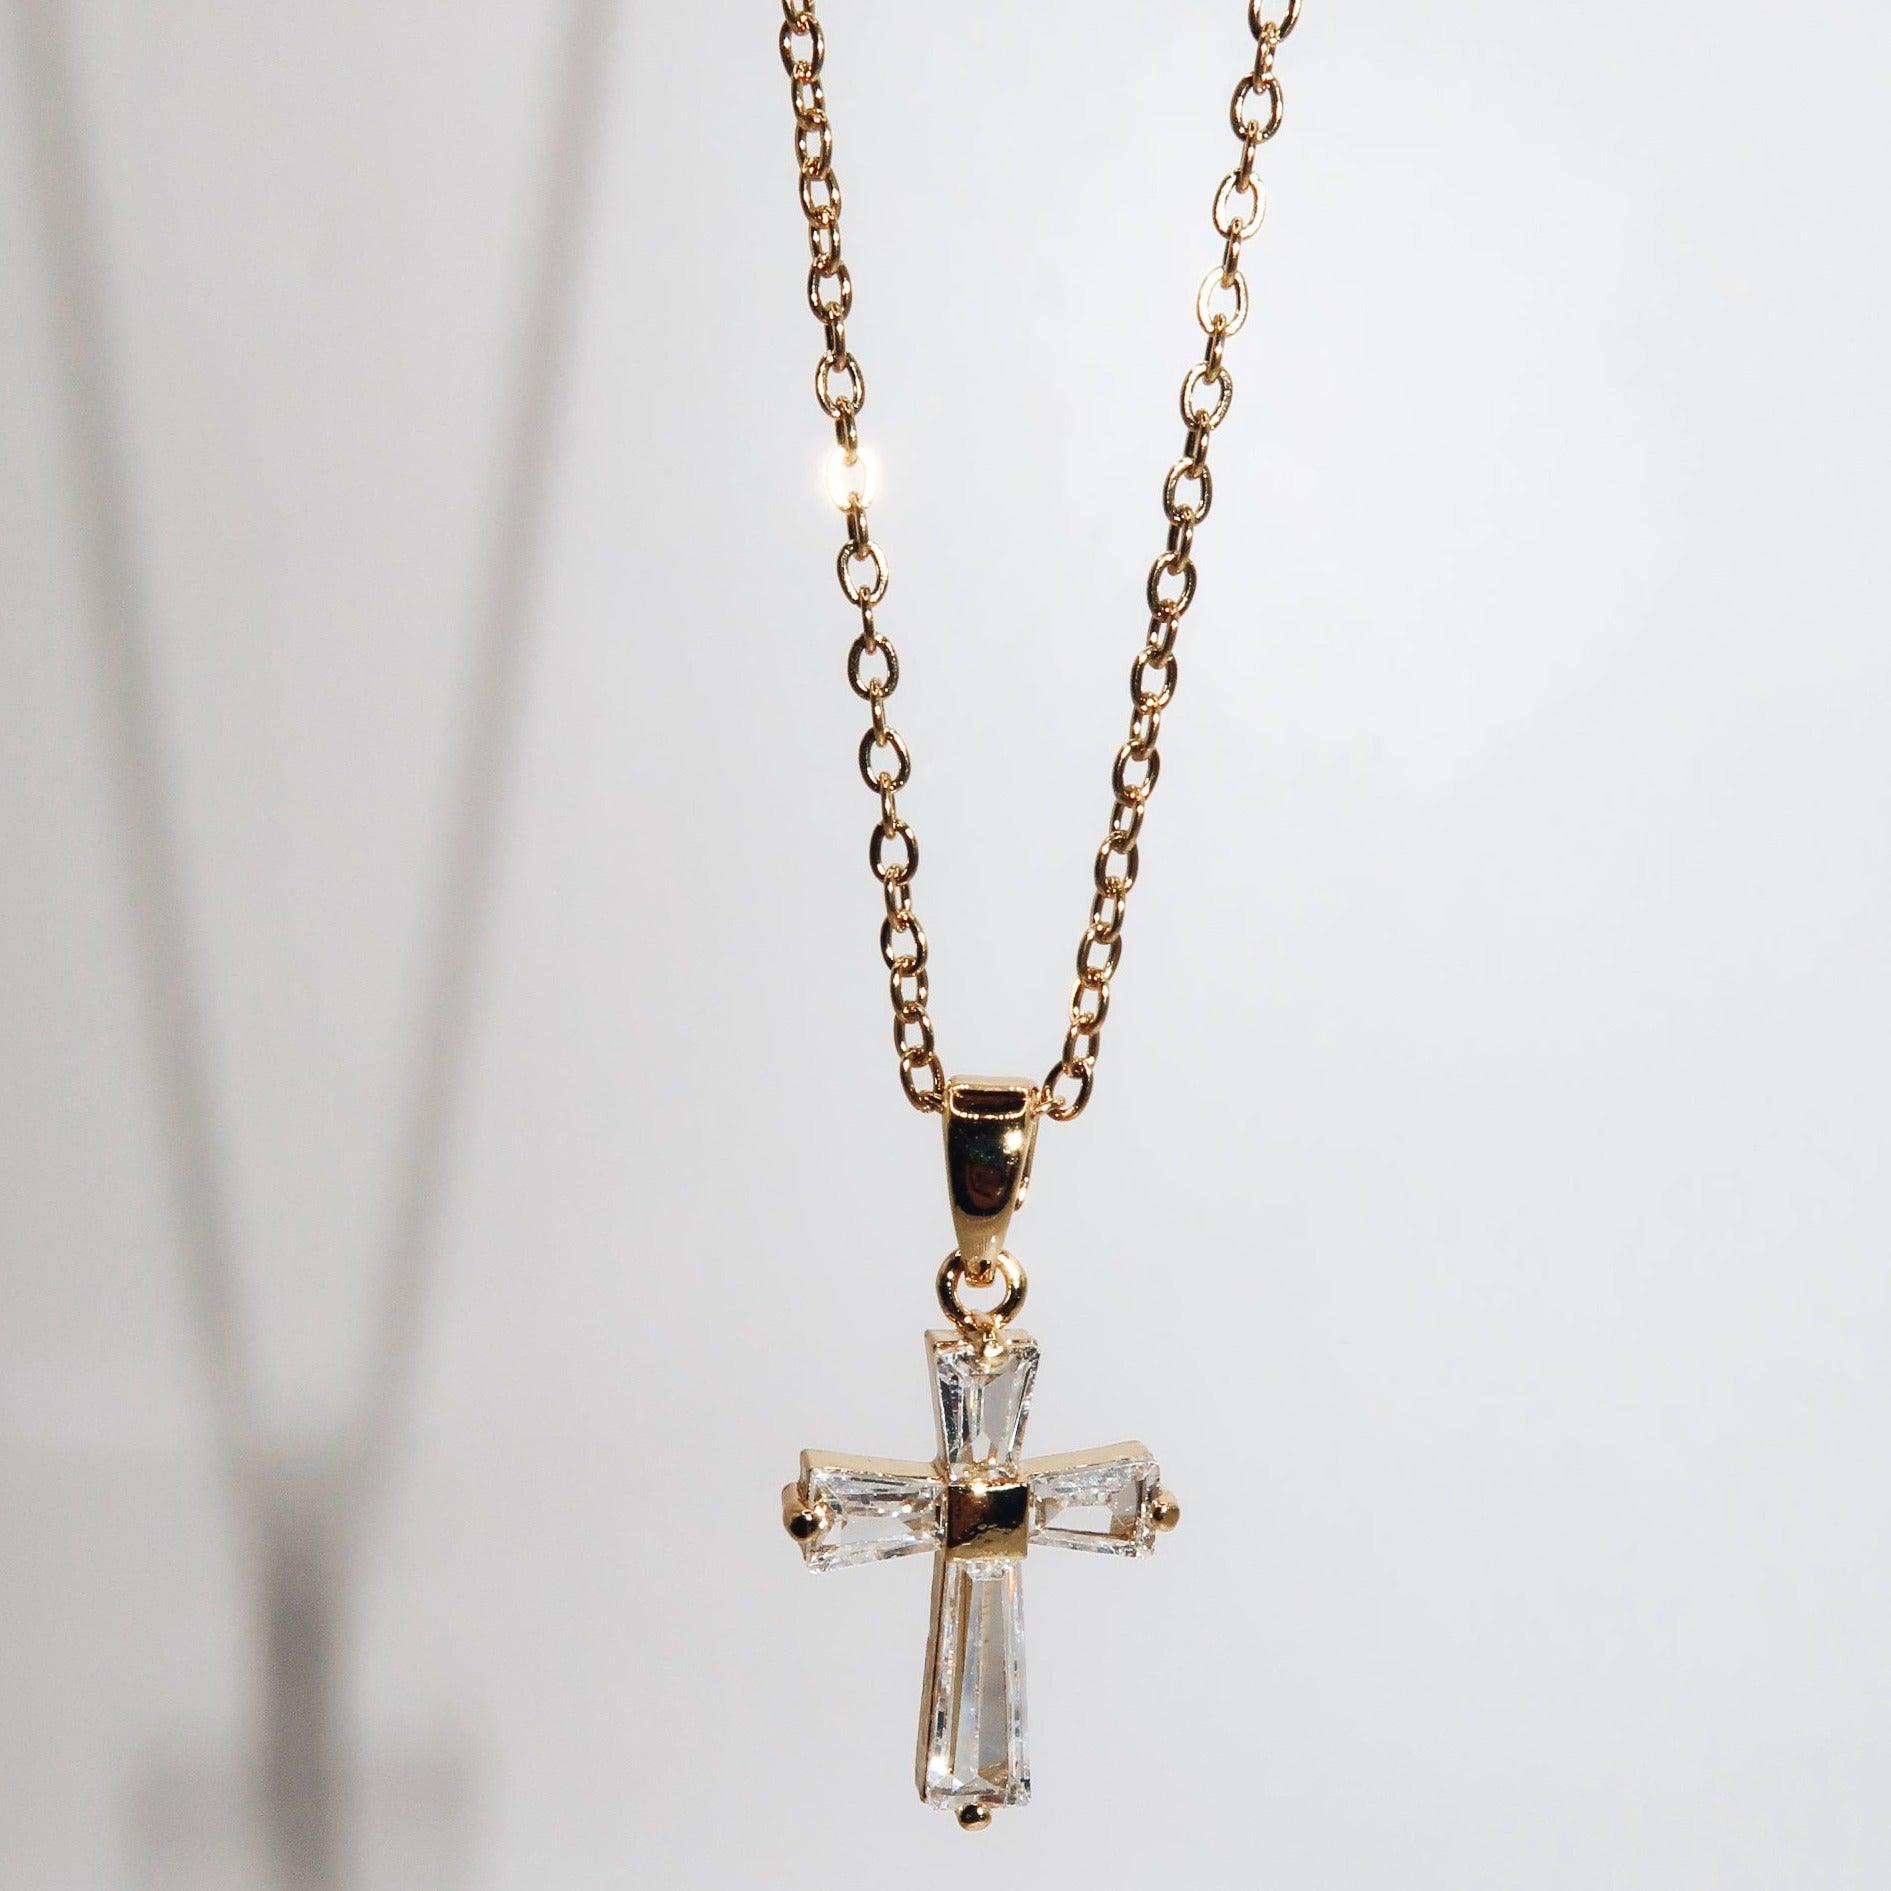 SOPHIA- 18K PVD Gold Plated Dainty Cross Pendant Necklace - Mixed Metals